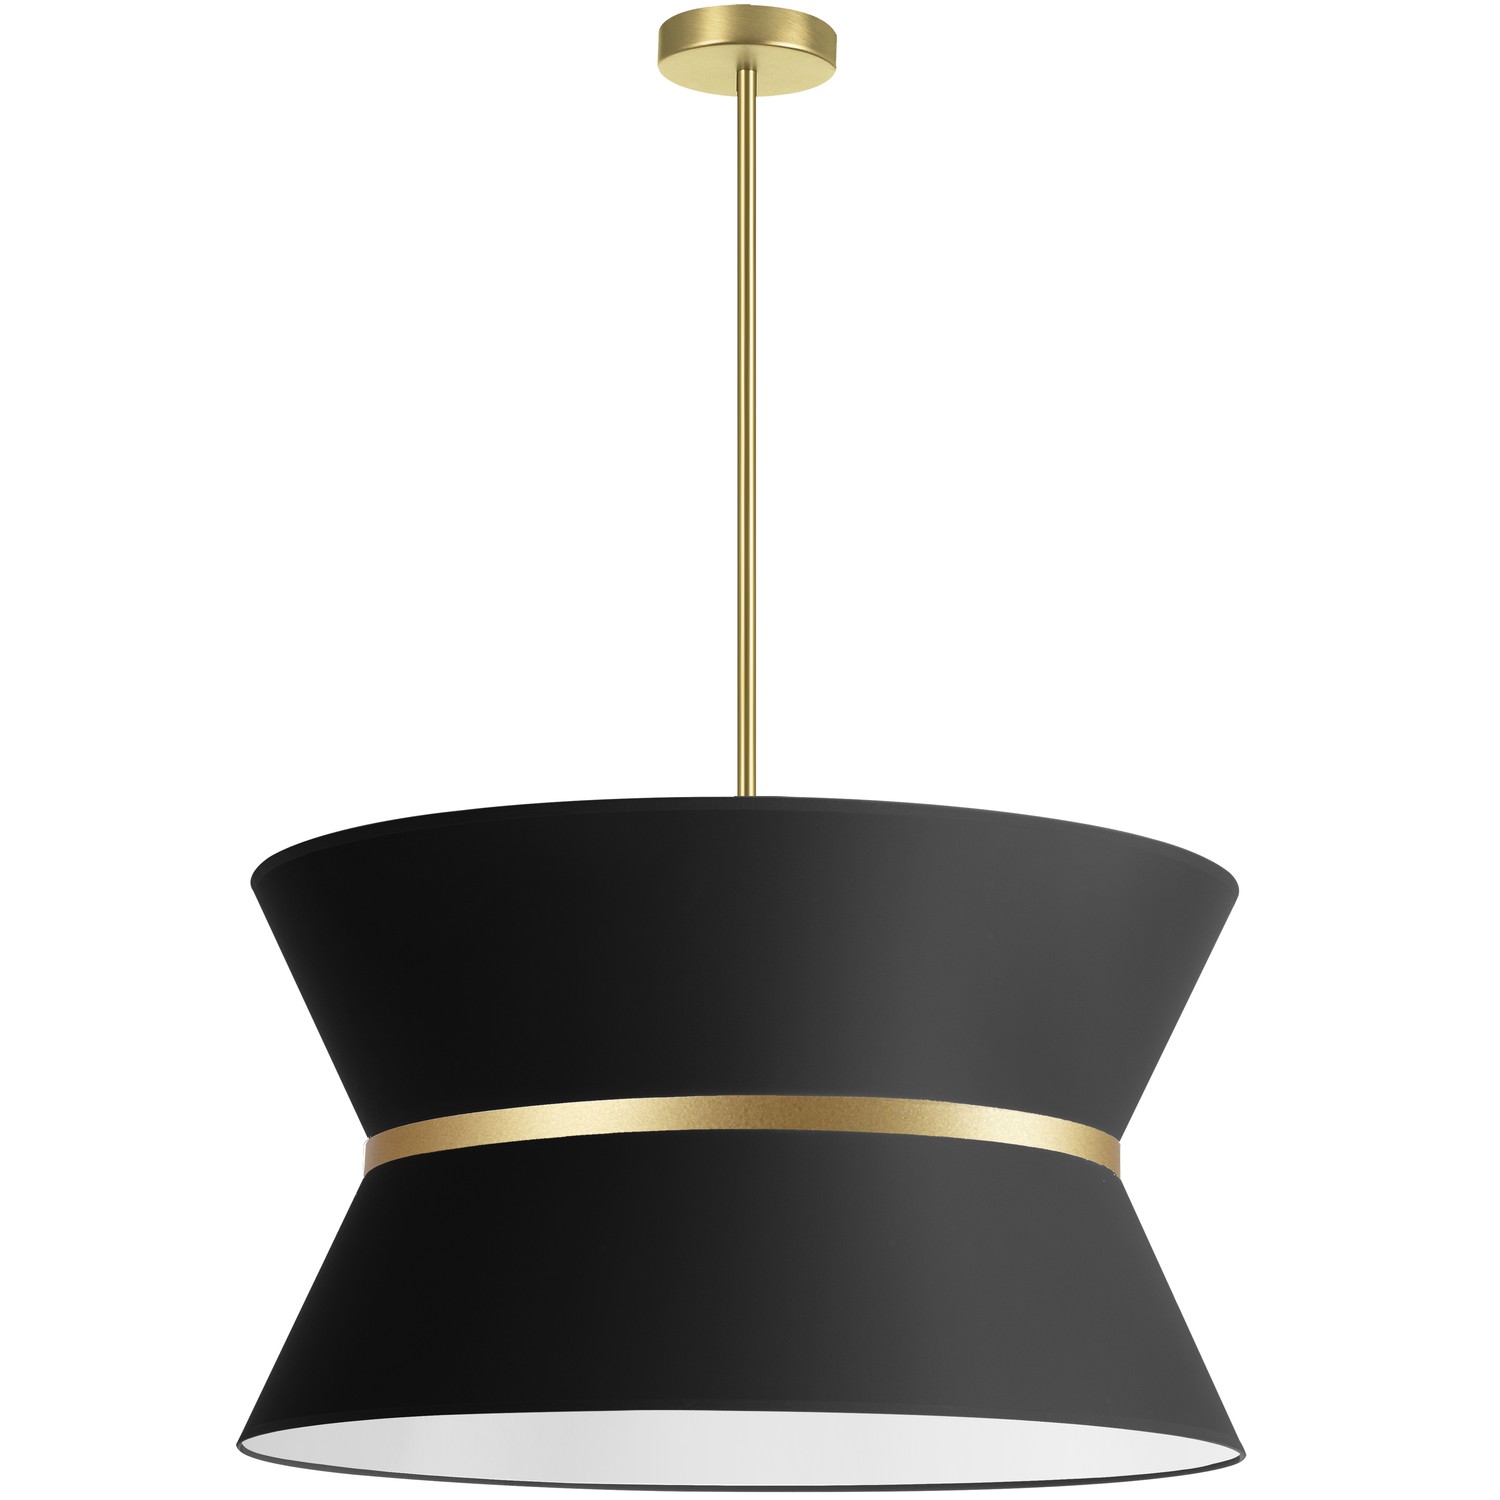 4 Light Incandescent Chandelier, Aged Brass with Gold Ring Black Shade